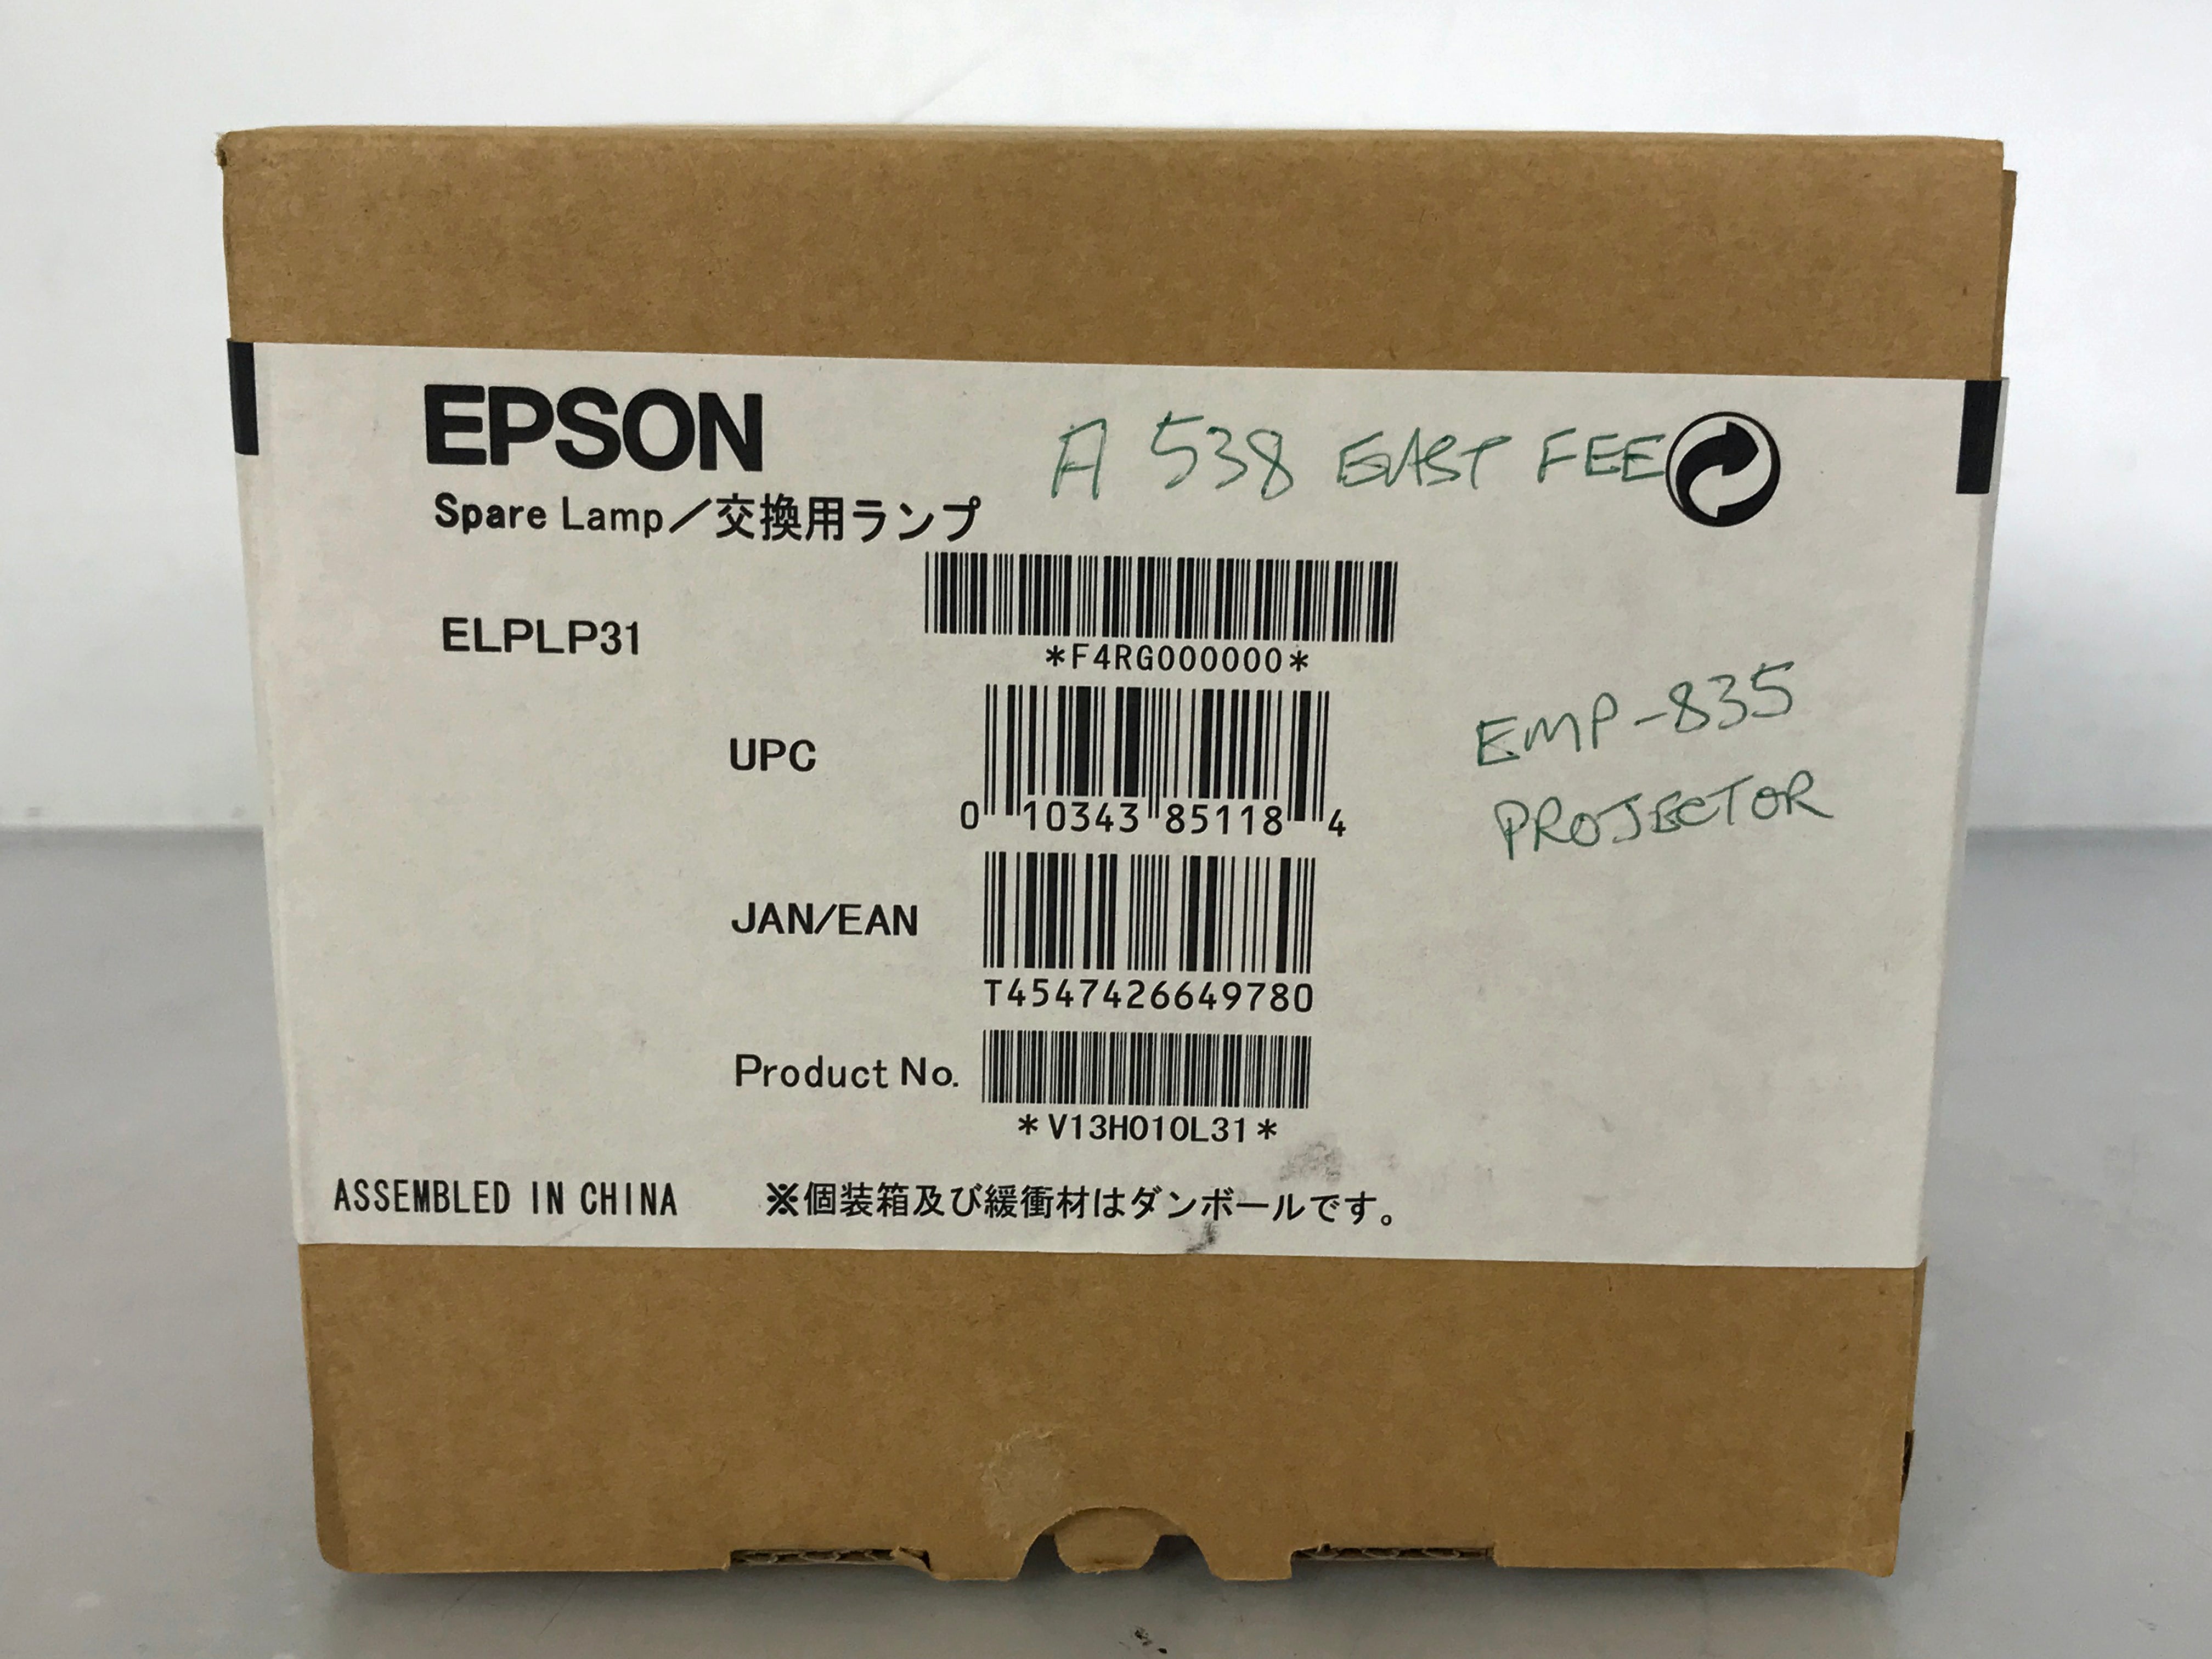 Epson Projector Spare Lamp ELPLP31